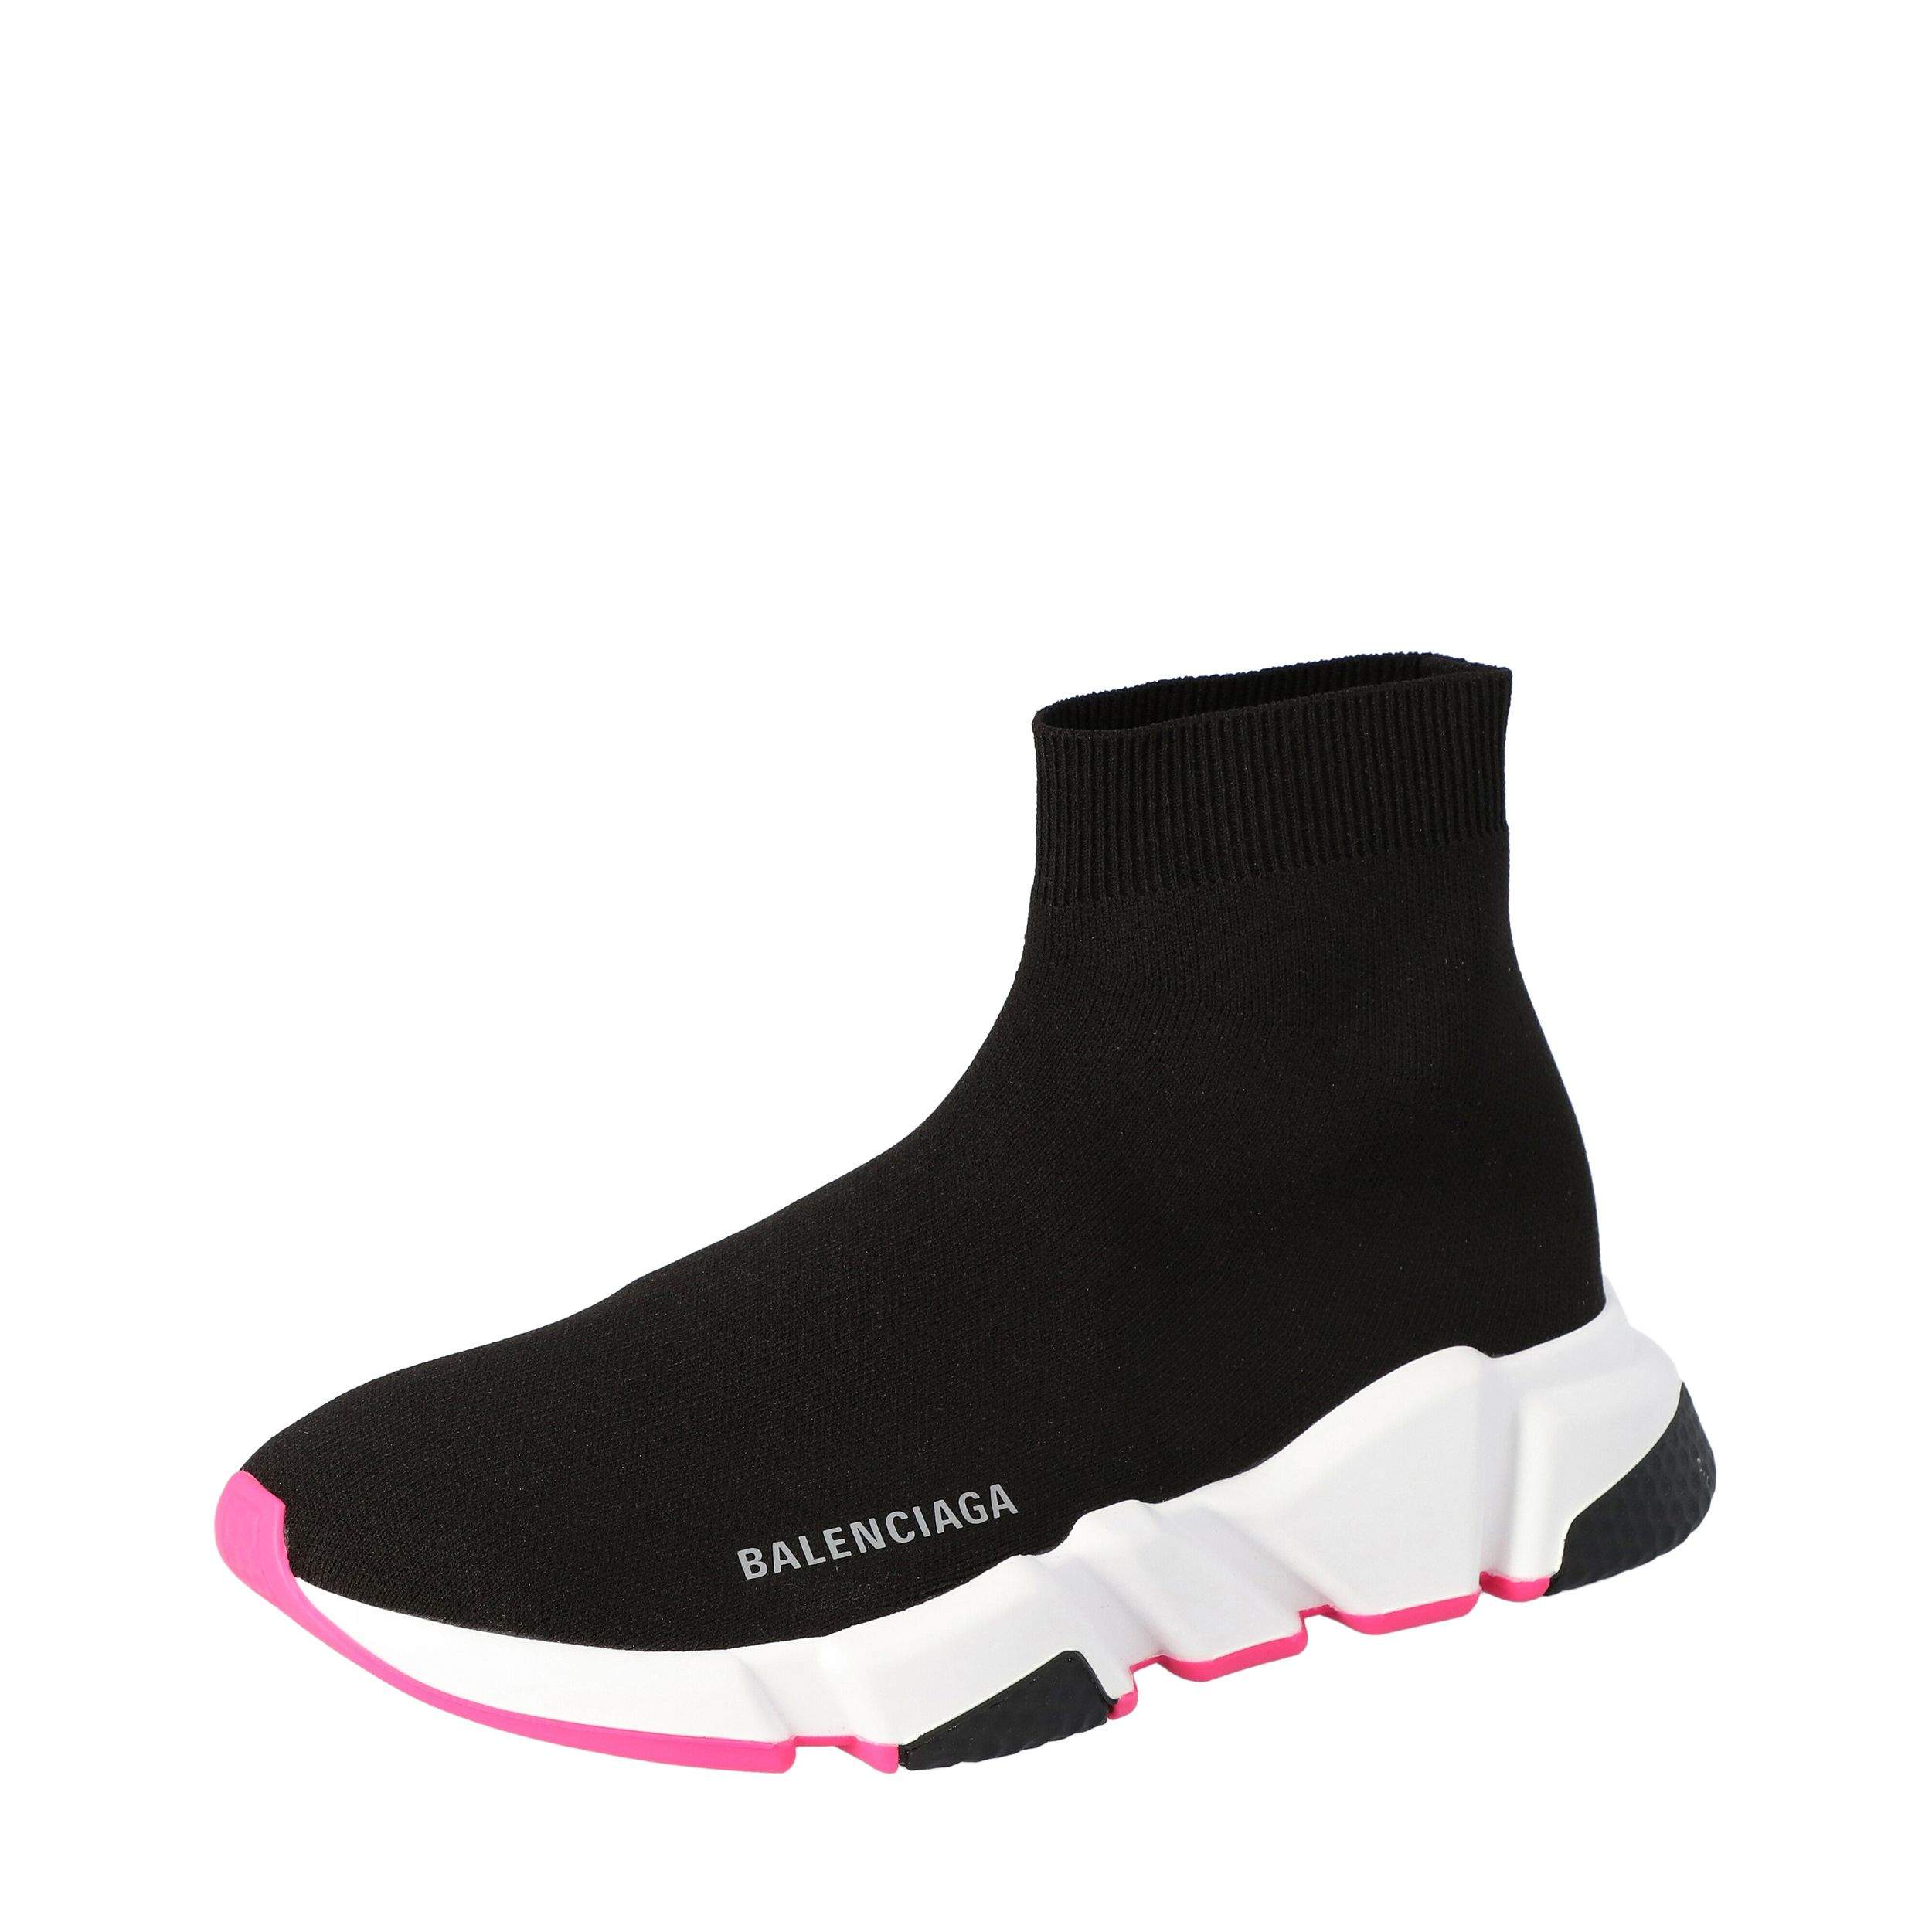 Balenciaga Black/Pink Knit Speed High Top Sneakers Size 36